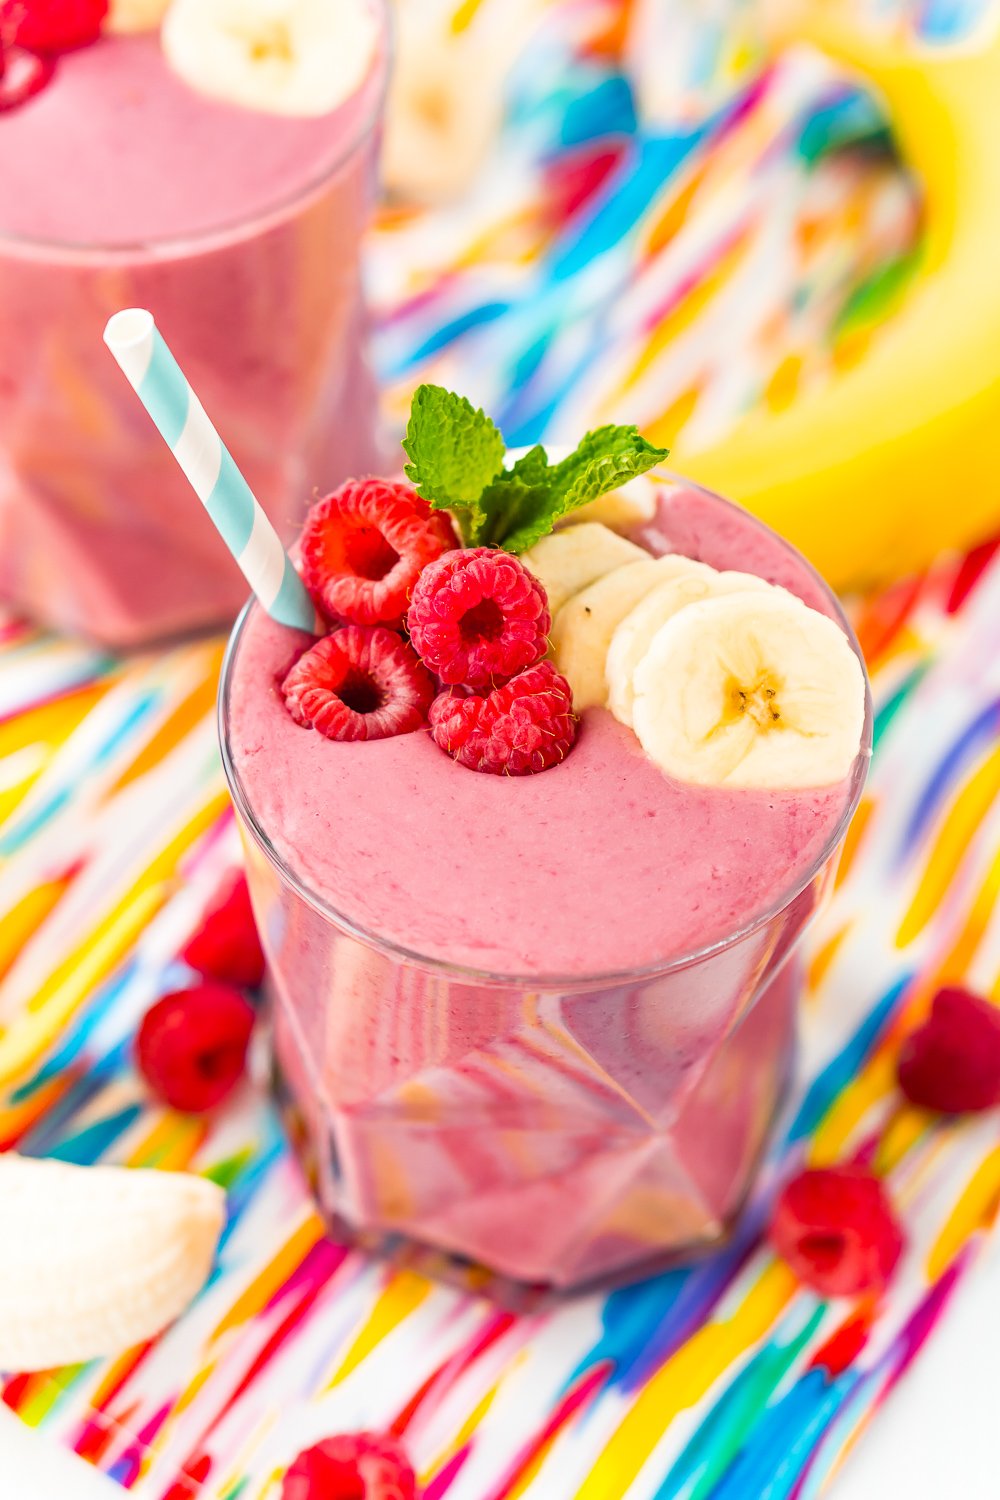 Raspberry Banana Smoothie topped with banana slices, mint, and fresh raspberries.